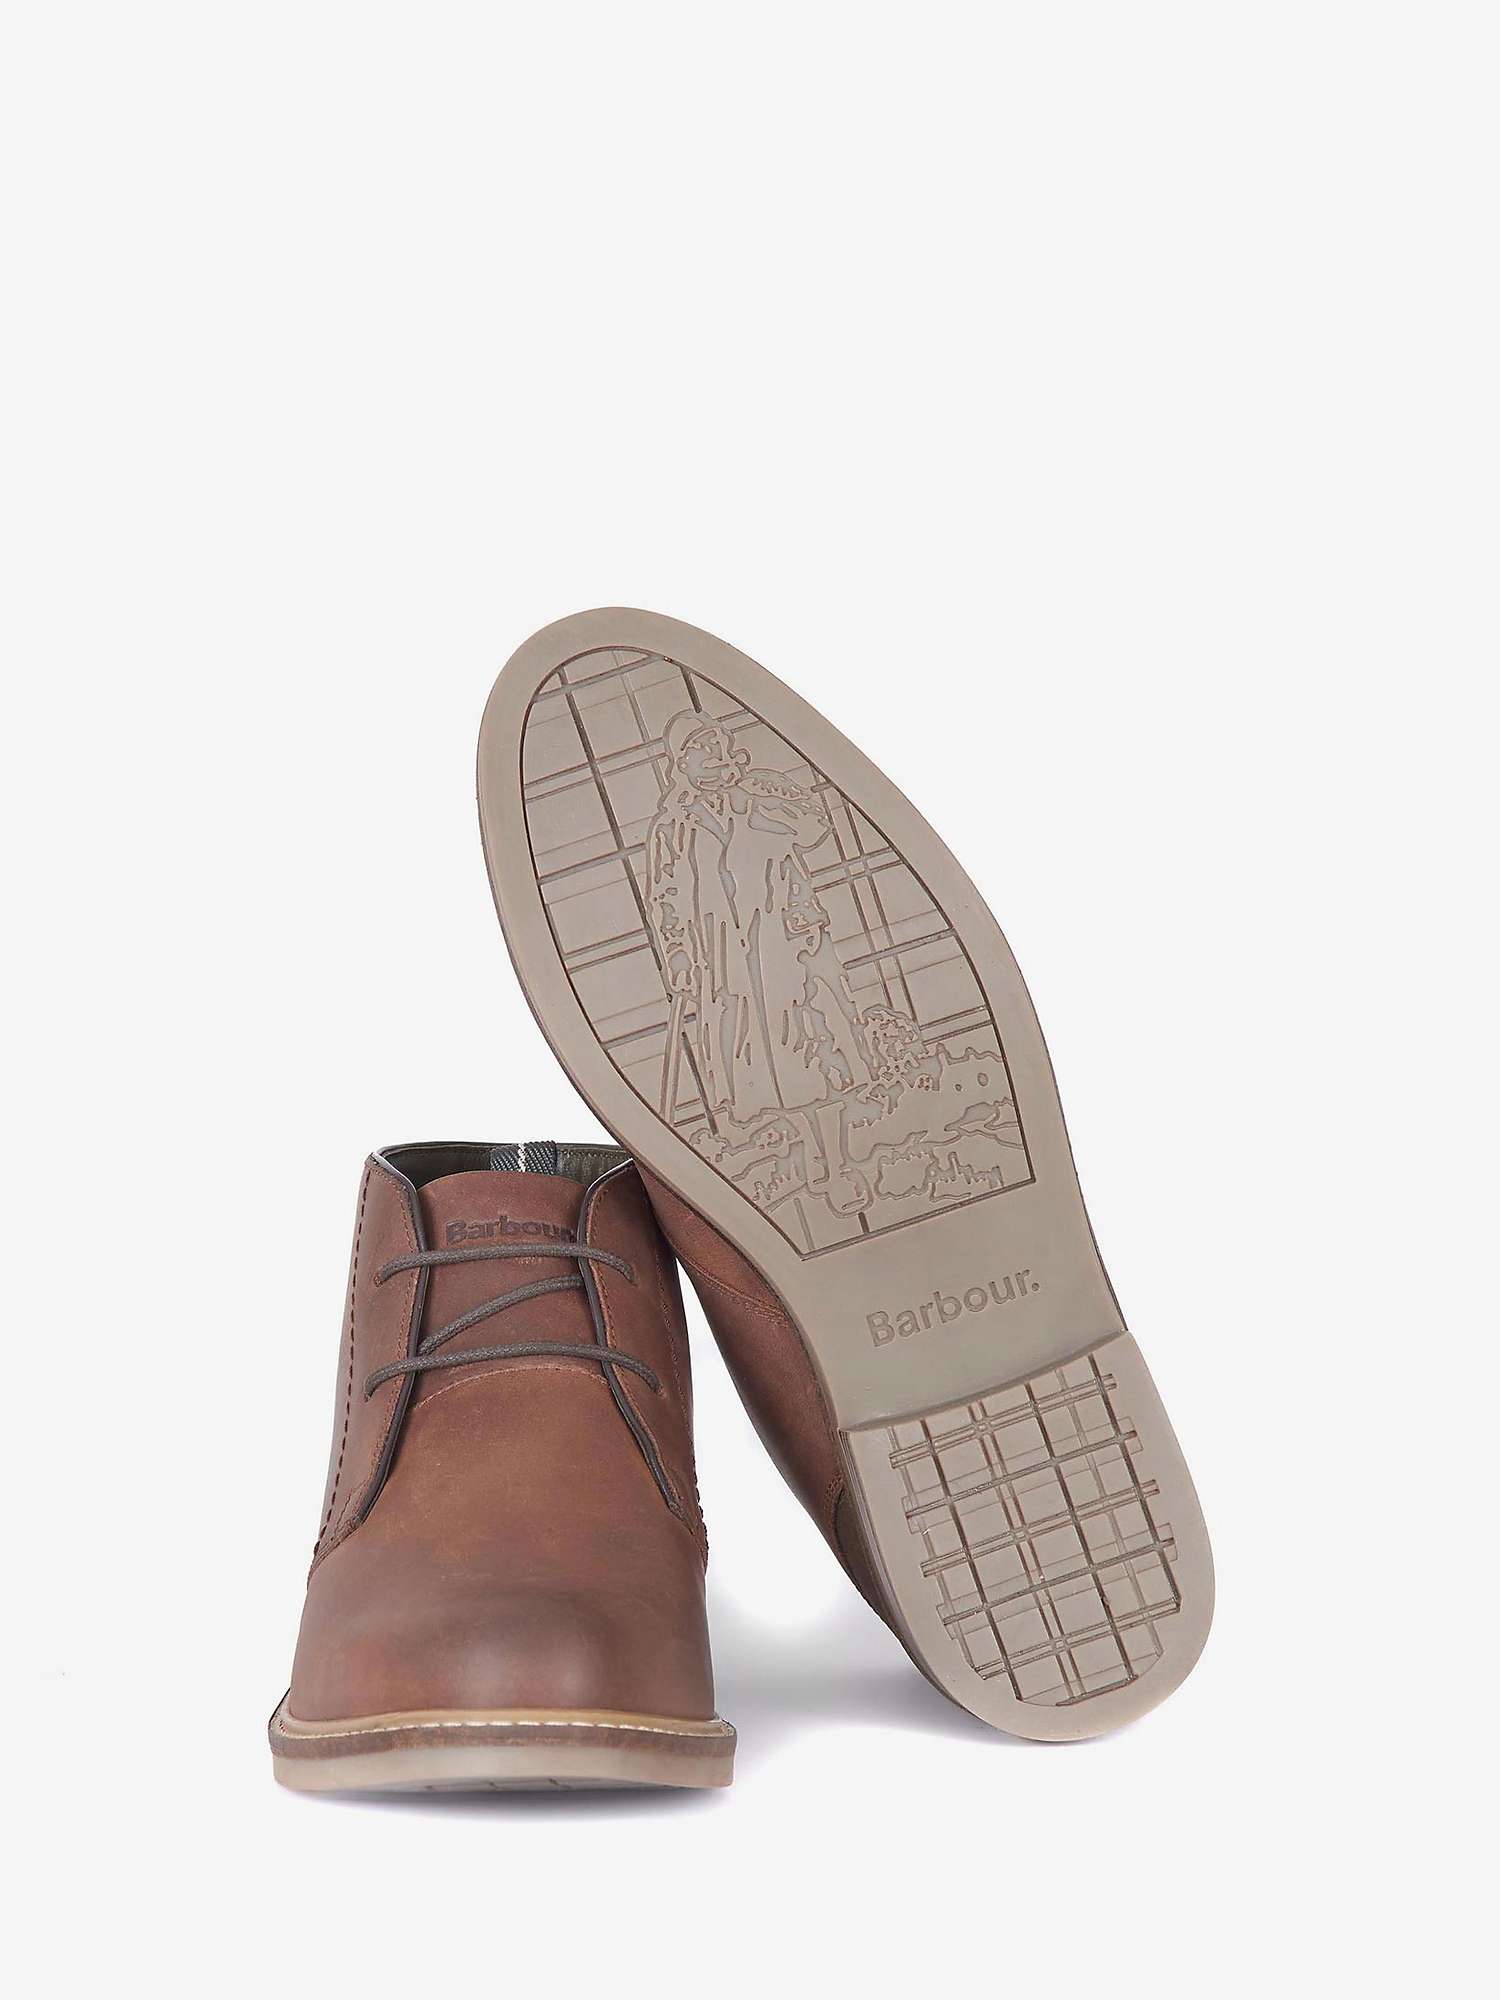 Buy Barbour Redhead Leather Chukka Boots Online at johnlewis.com